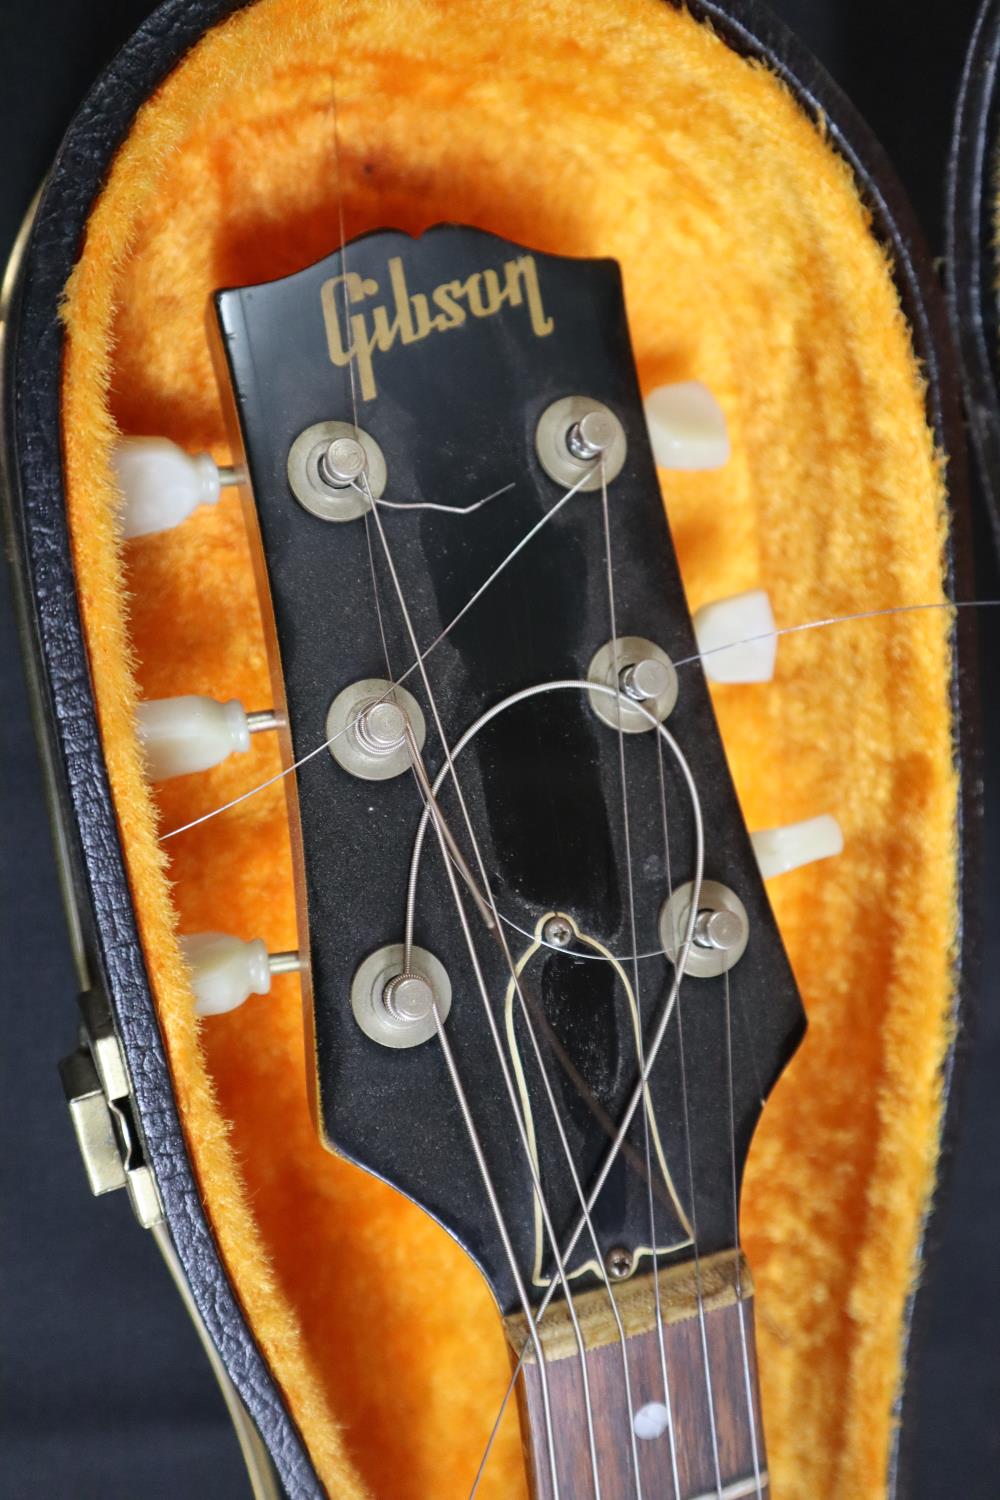 Vintage Gibson 501700 six string electric guitar with four pickups in natural wood finish and - Image 3 of 4